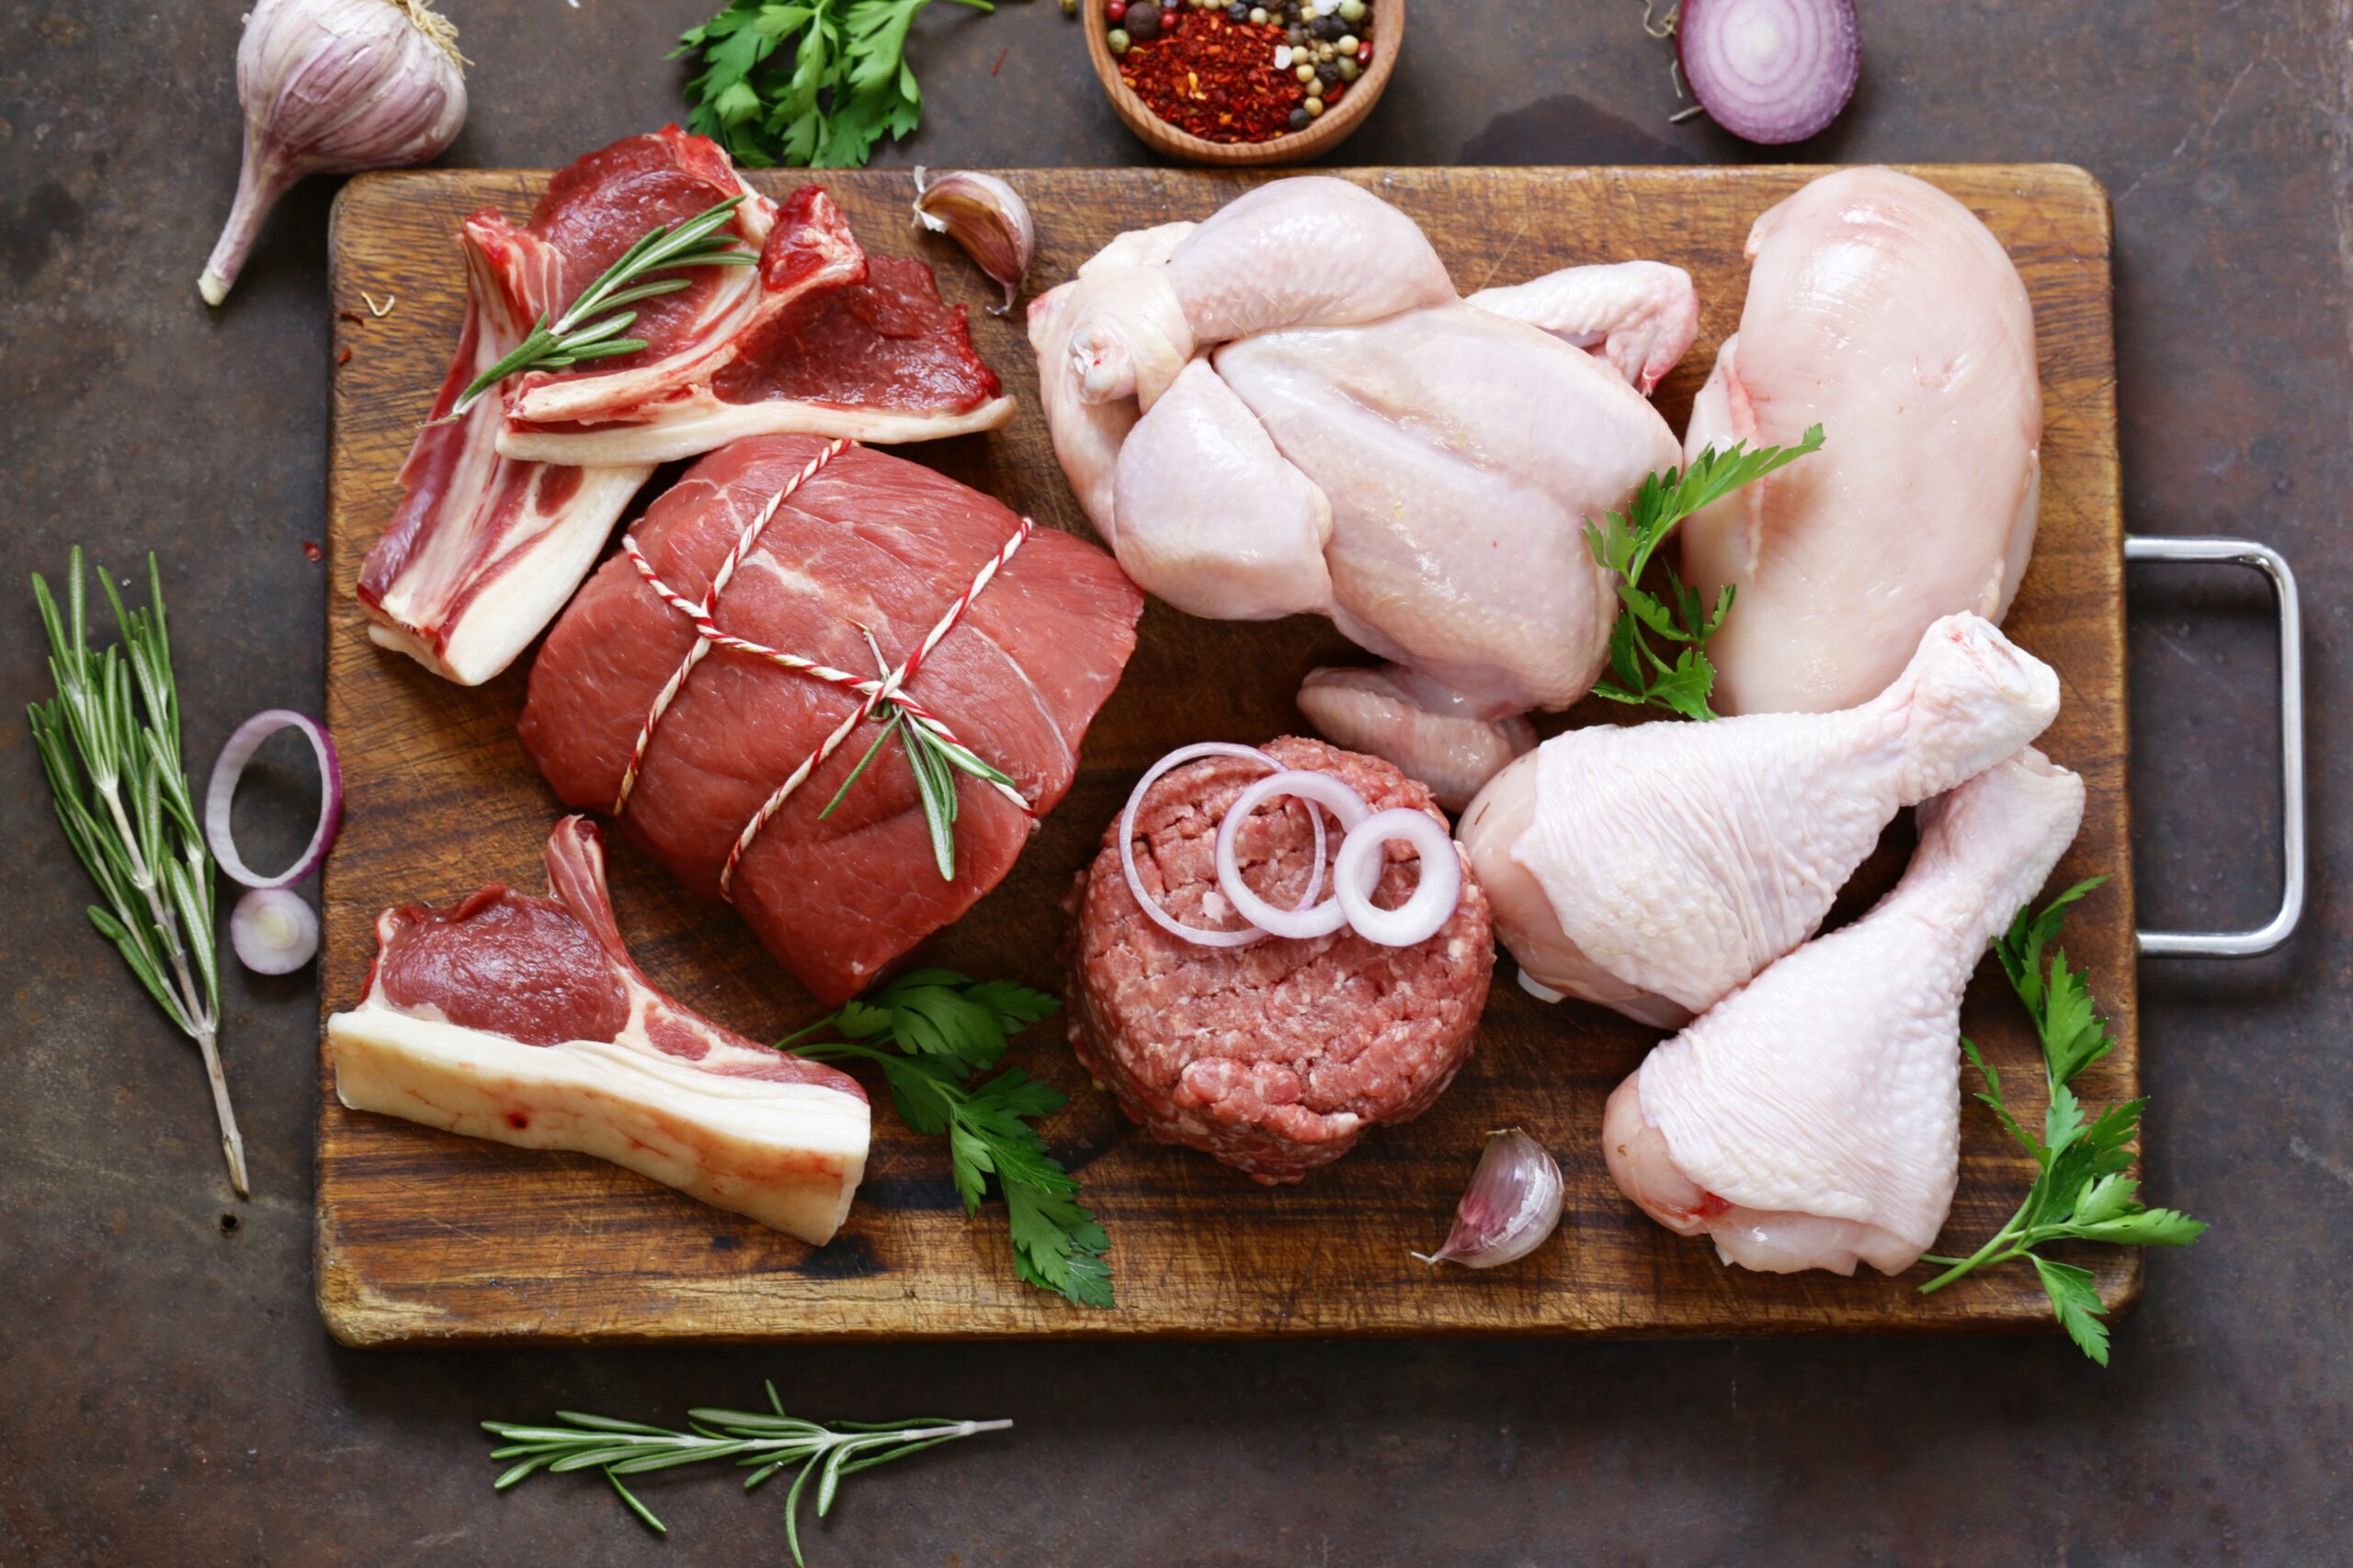 Red & White Meats Are Equally Detrimental For Cholesterol